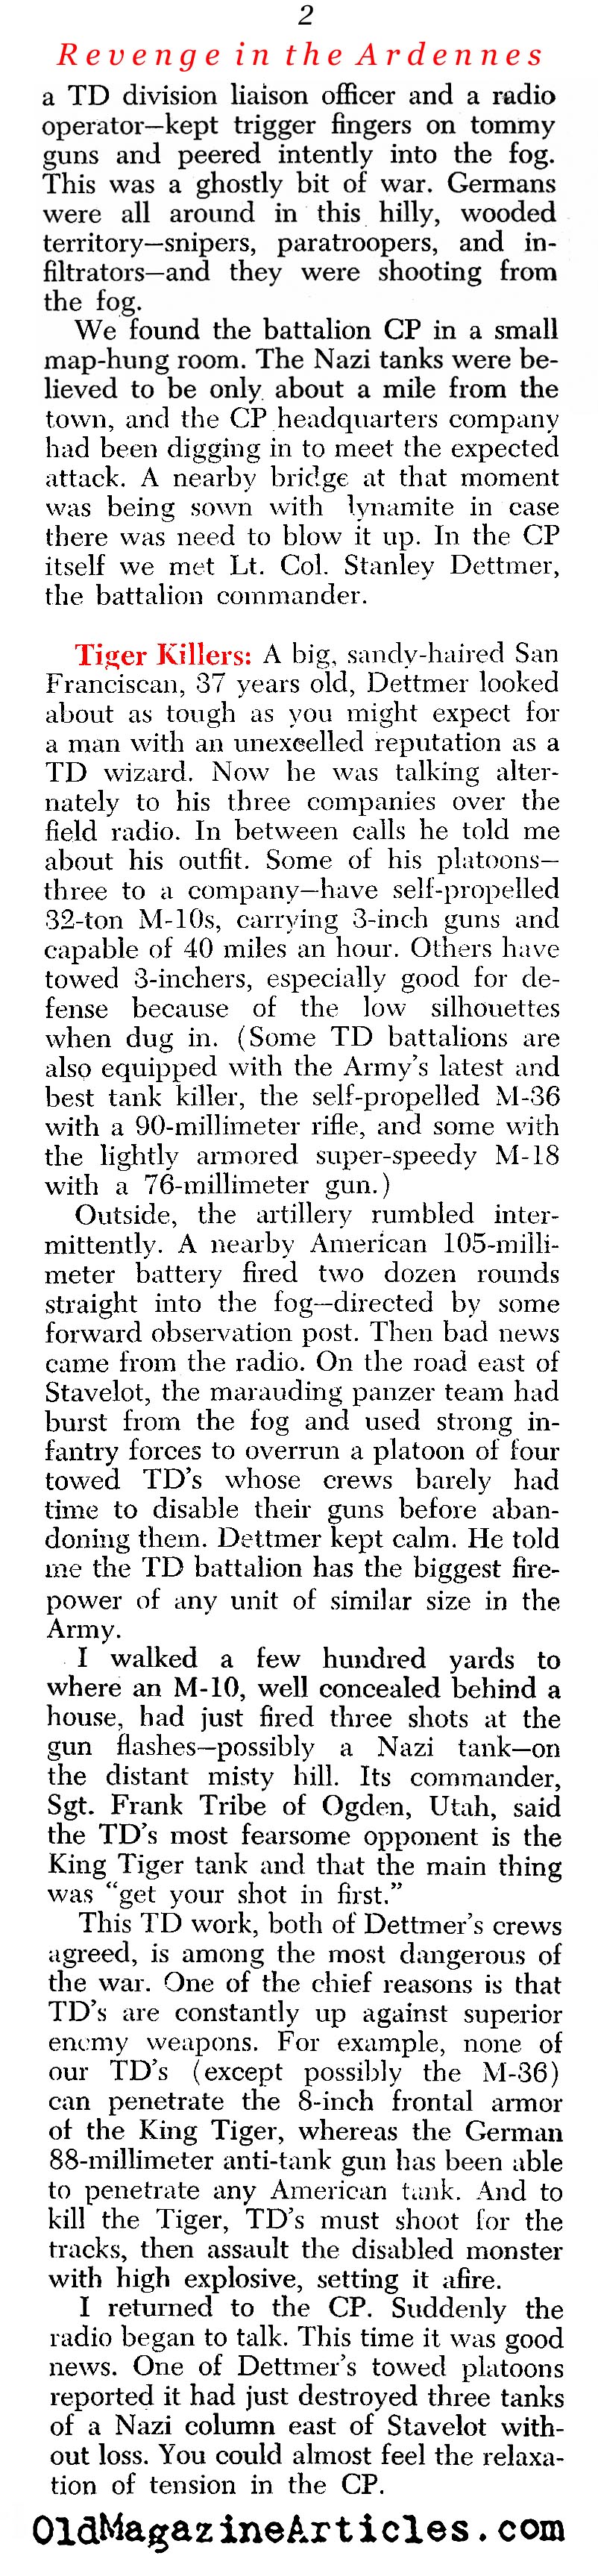 Killing Tiger Tanks in the Ardennes (Newsweek Magazine, 1945)